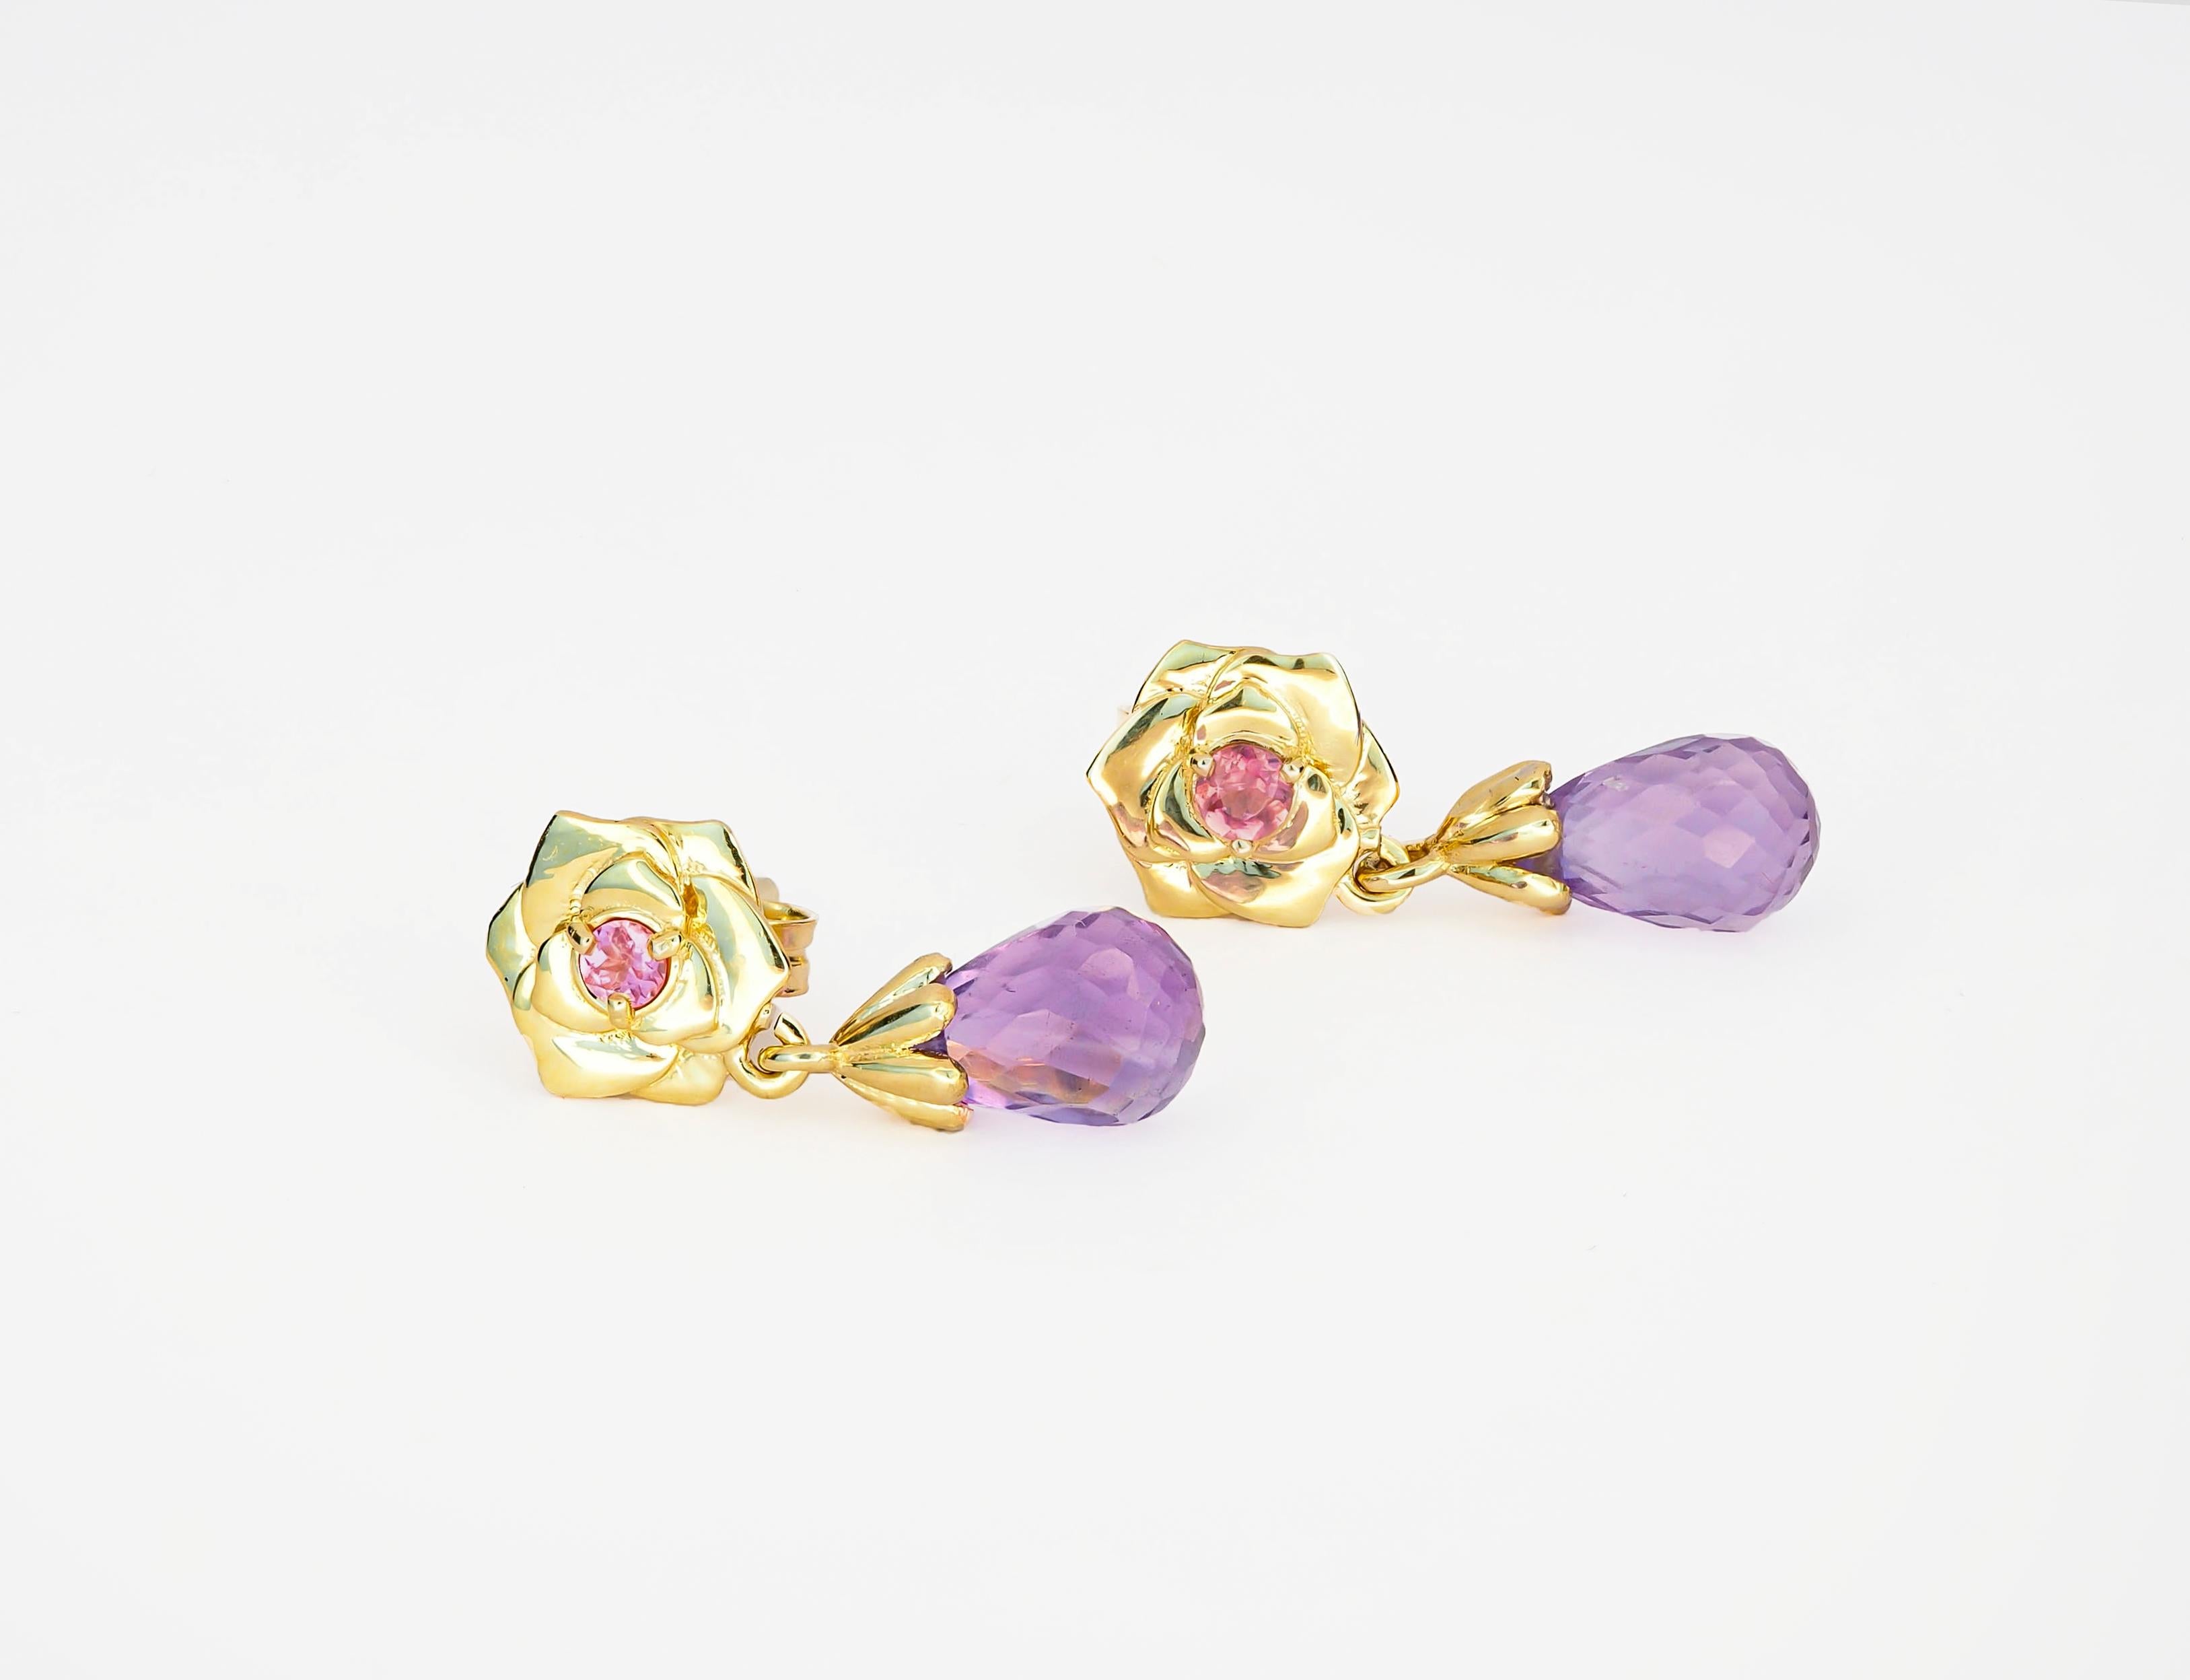 14 kt solid gold earrings with natural amethysts and sapphires. Febrary birthstone.
Weight: 2.45 g.
Earrings Size: 18 x 8 mm.

Main stones: Natural amethysts - 2 pieces (2 pieces x 1.20 ct)
Total weight: 2.40 ct total aprox
Briolette shape, violet